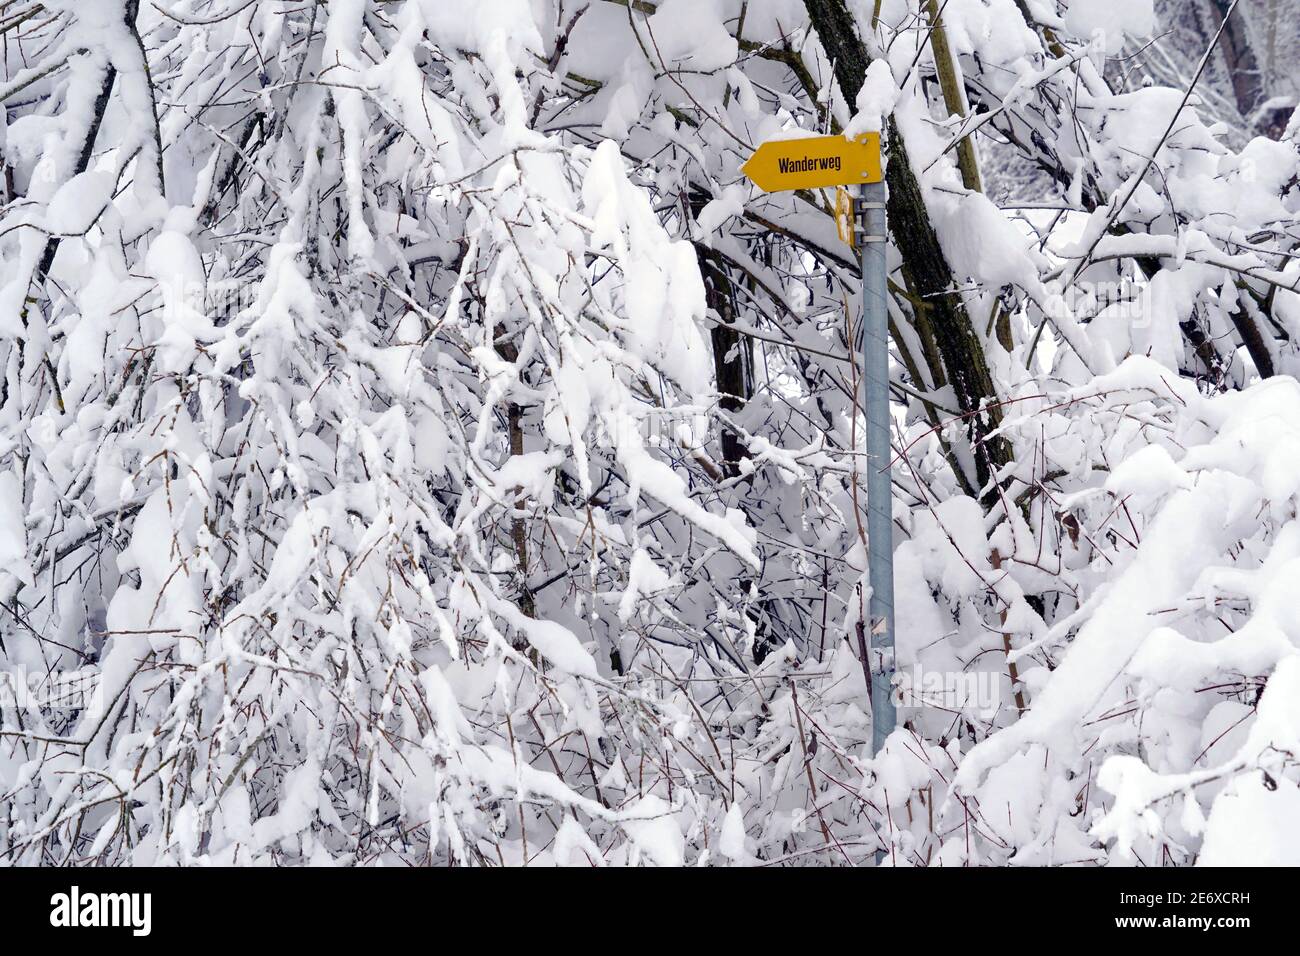 Winter landscape in detail, tree branches thickly covered with snow and yellow signposts with inscription hiking trail German language, village Urdorf Stock Photo